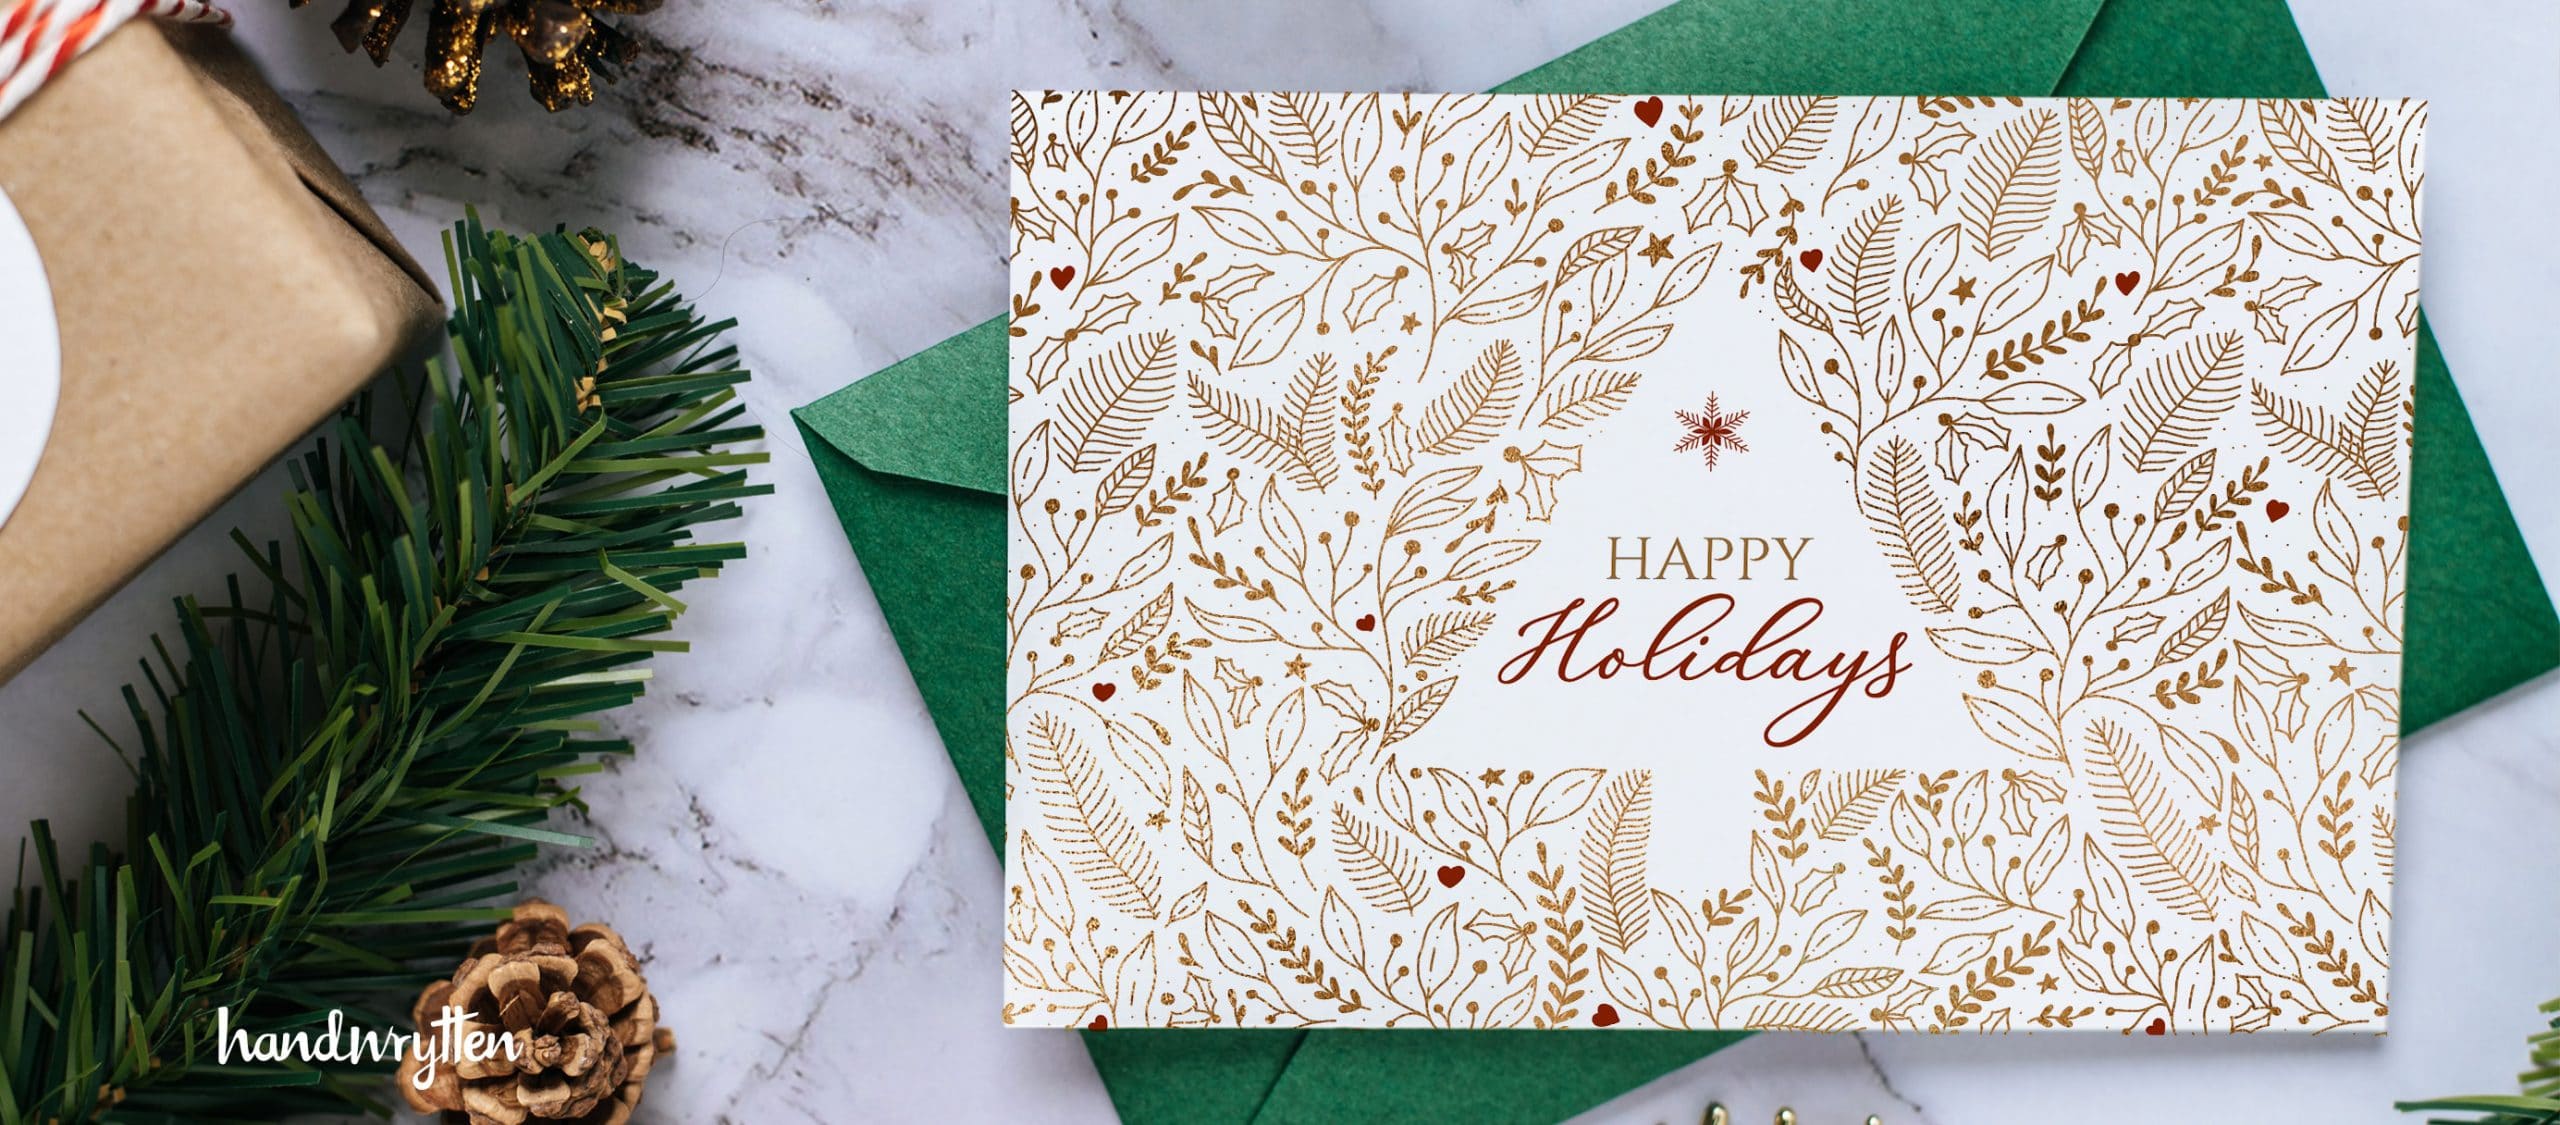 10 Funny Christmas Card Messages for Business - Handwrytten